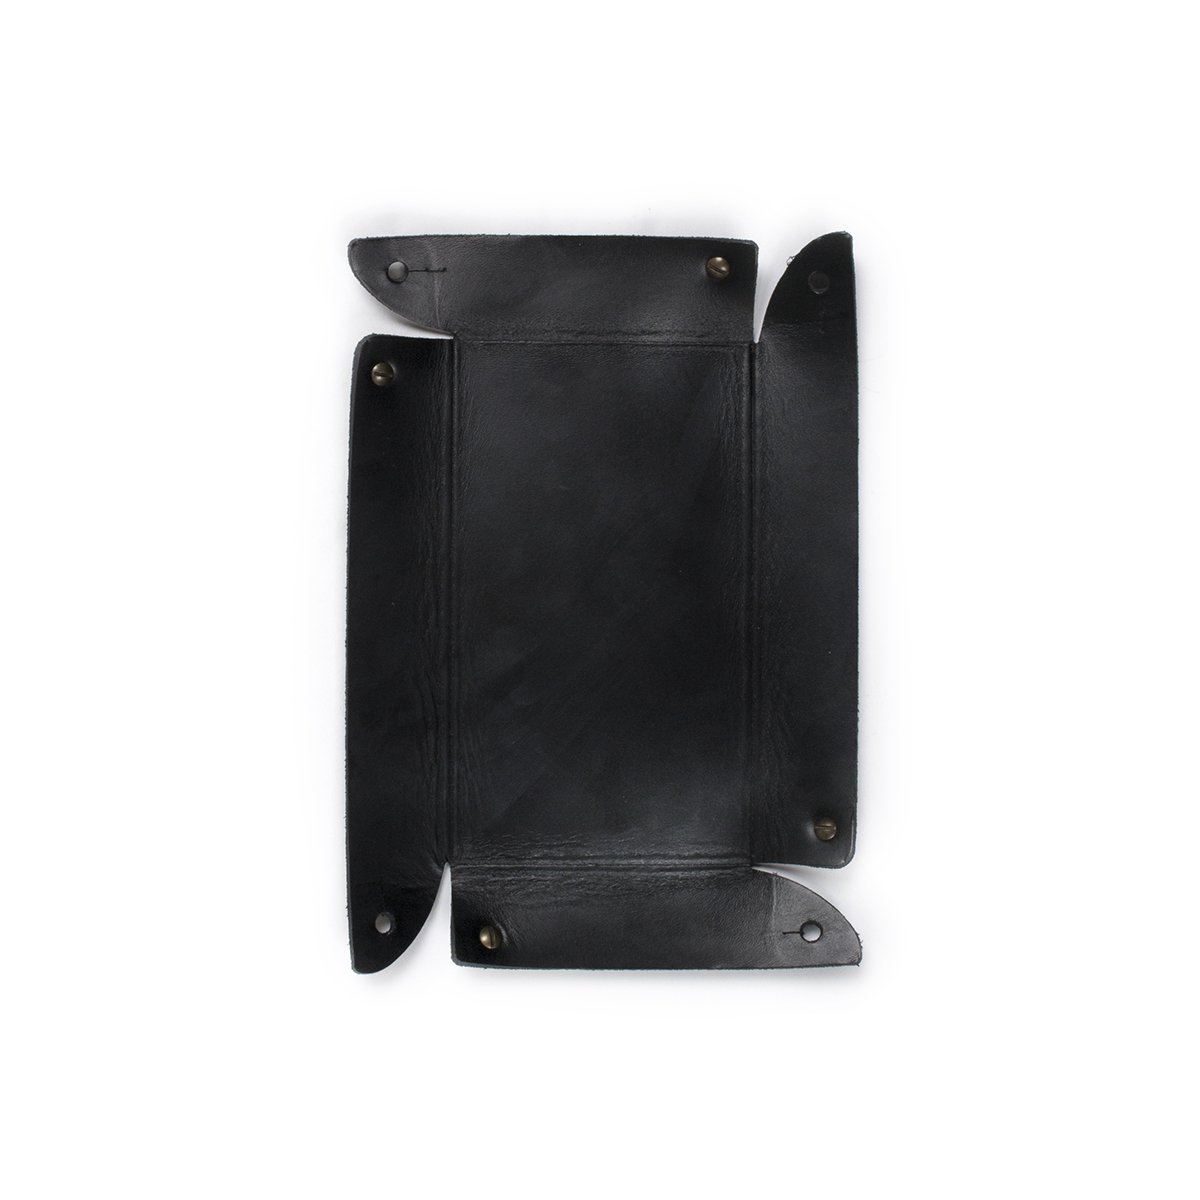 Leather Catch Tray – Leather Crafts by Zippy